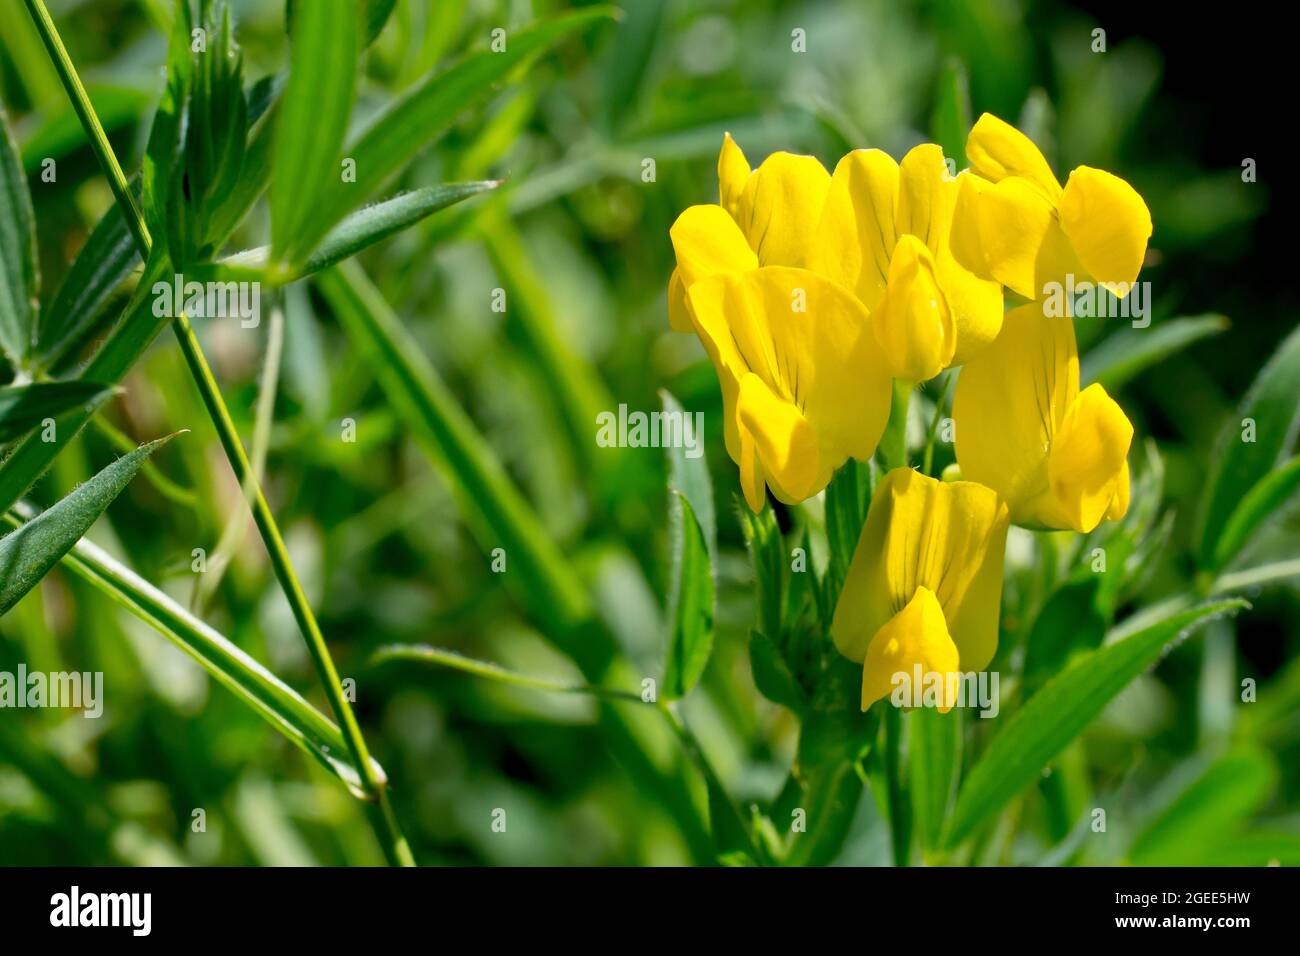 Meadow Vetchling (lathyrus pratensis), close up of a cluster of the yellow flowers growing in a thick patch of grass. Stock Photo